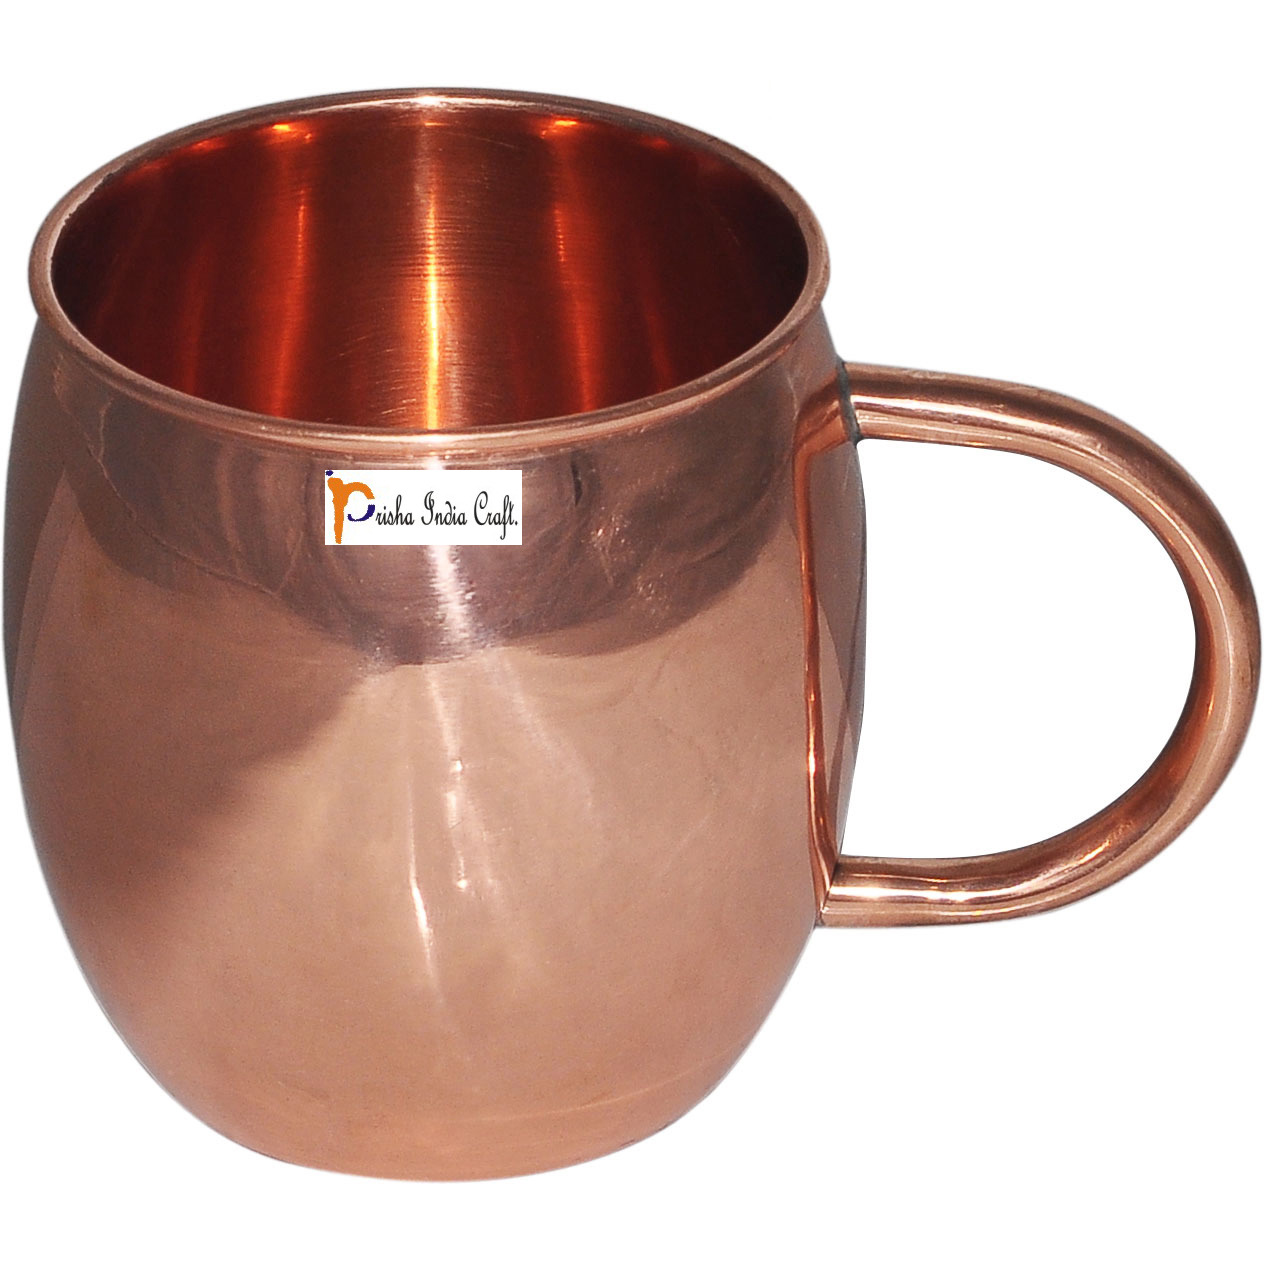 Set of 6 - Prisha India Craft B. Copper Barrel Mug Classic for Moscow Mule 520 ML / 17 oz Pure Copper Mug, Copper Mule Cup, Moscow Mule Cocktail Cup, Copper Mugs, Cocktail Mugs - with No Inner Linings